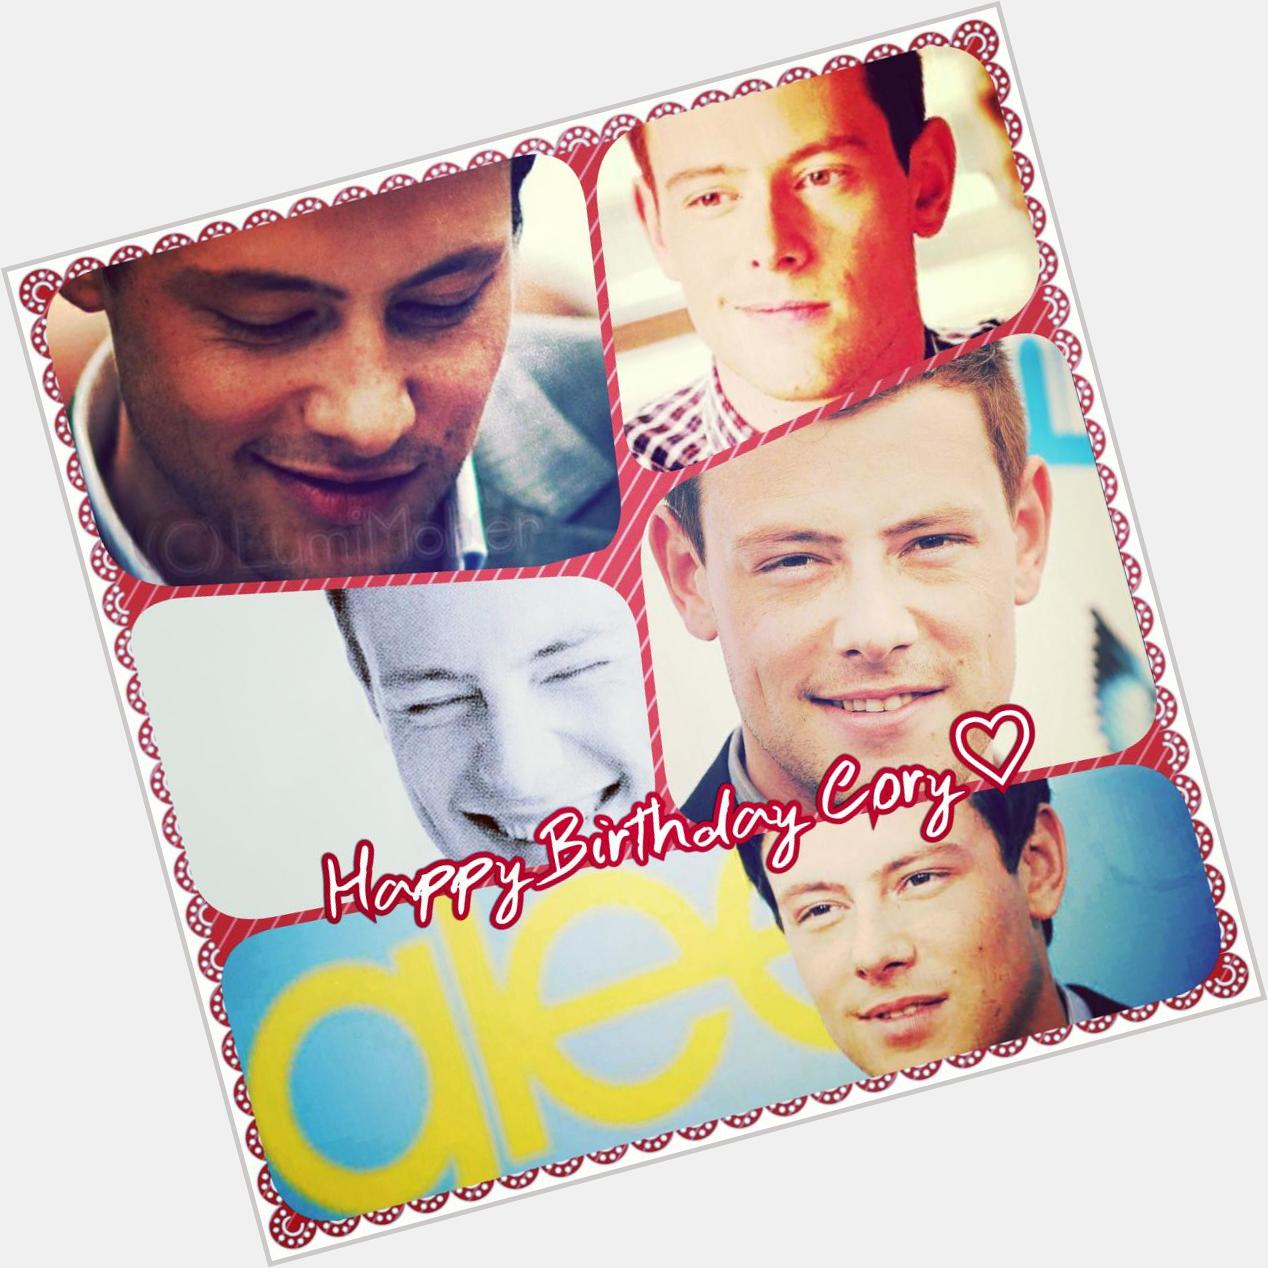 Happy Birthday Cory    Cory Monteith Birthday Project | Hollywood Hills:  